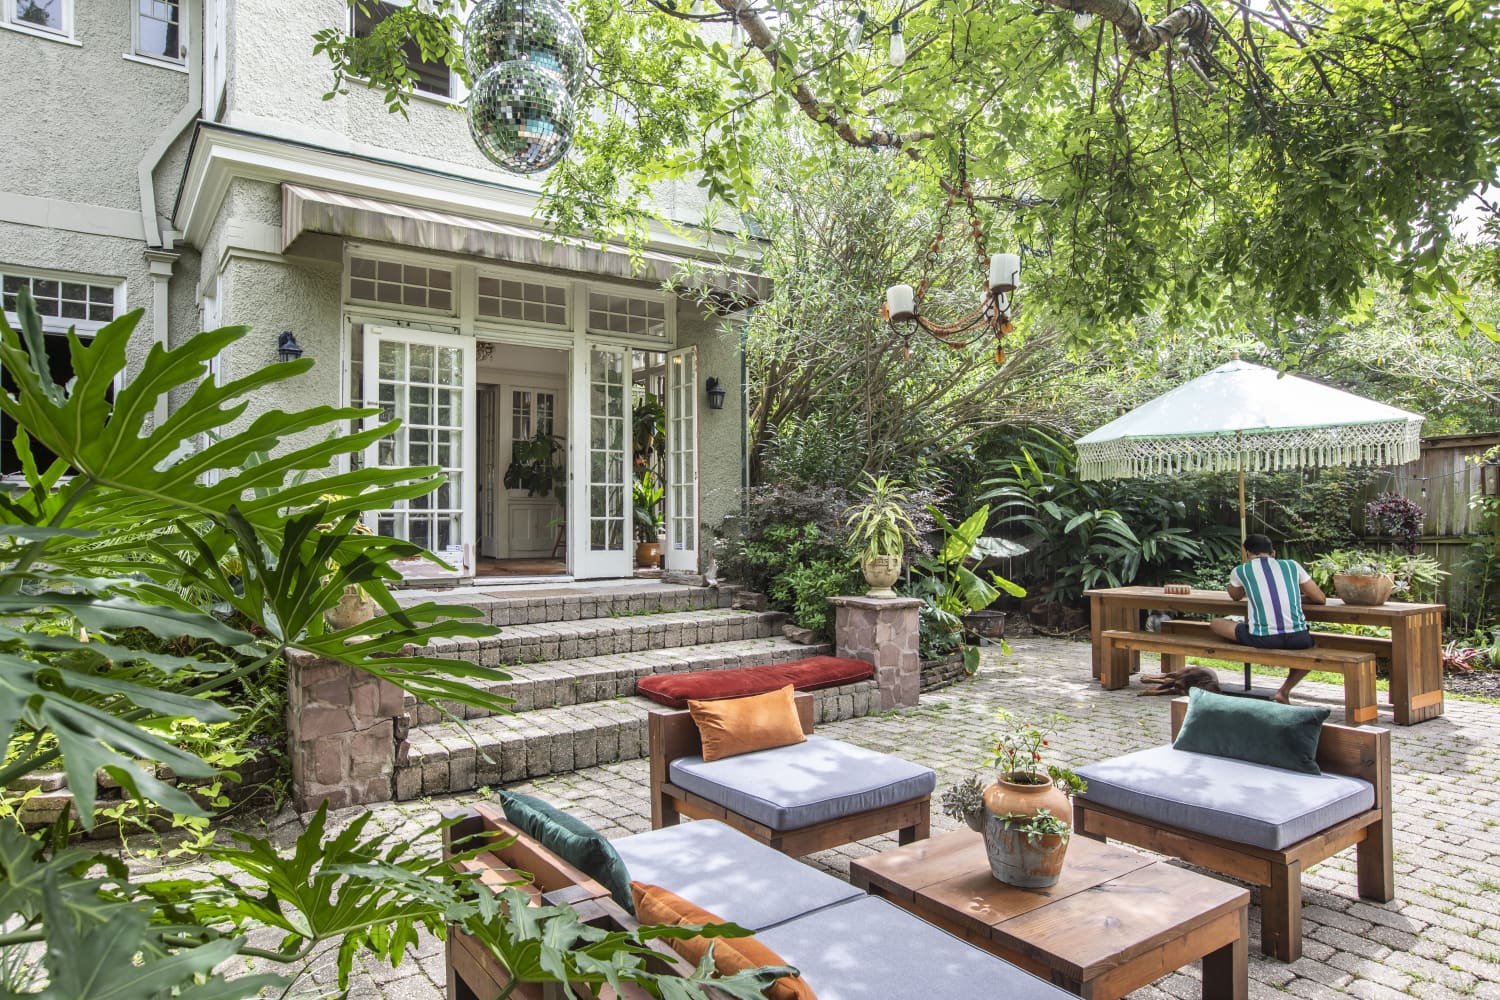 8 Tips for Dressing Up Your Patio This Summer